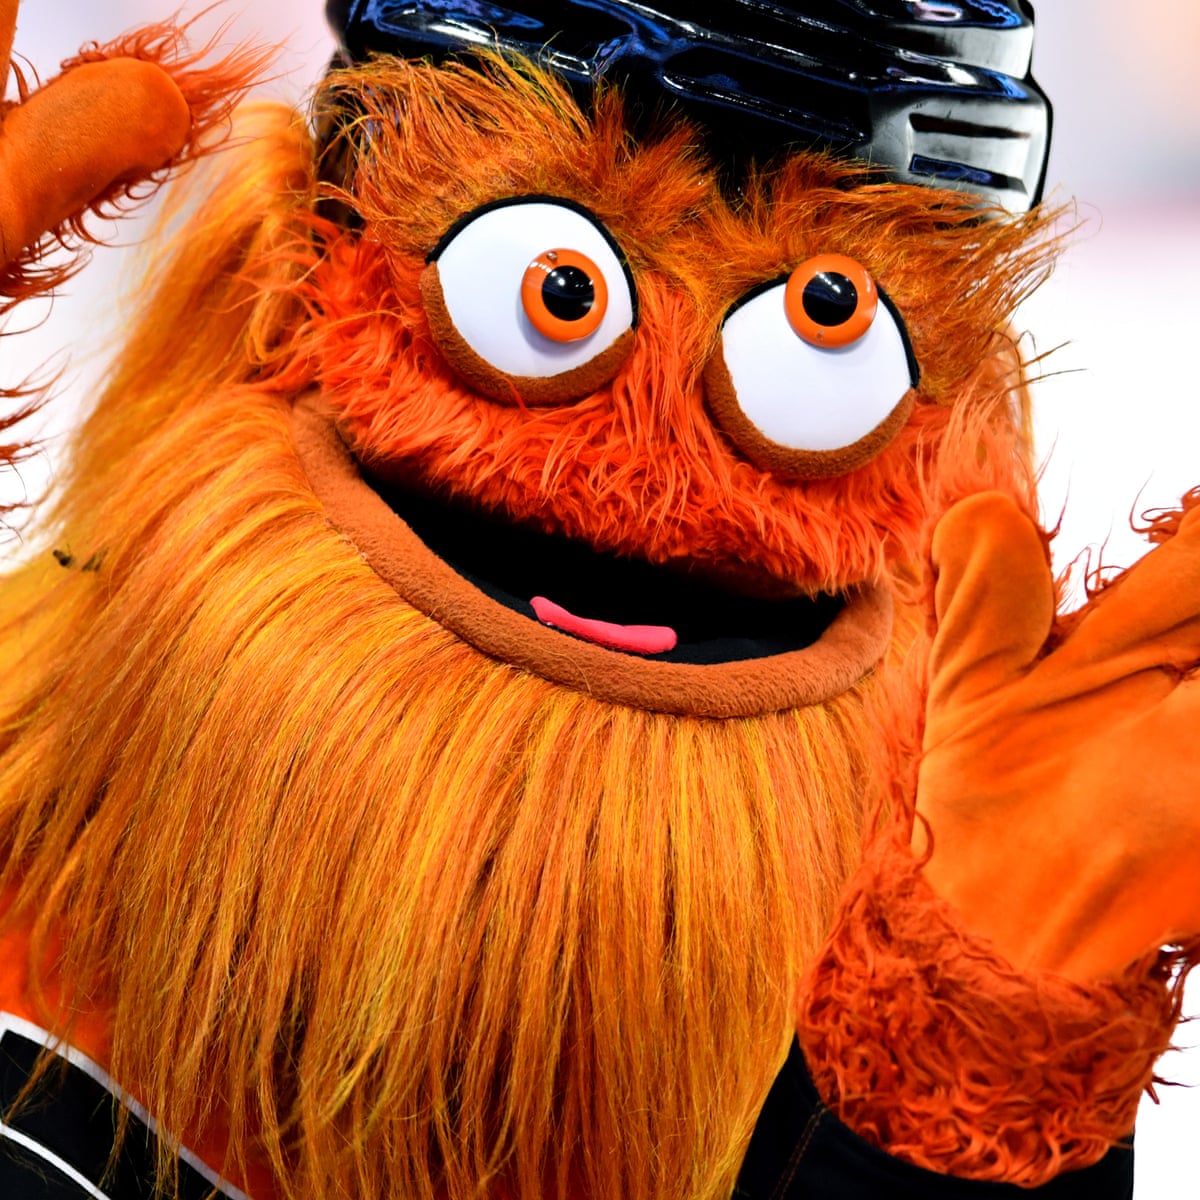 Philadelphia Flyers Mascot Gritty Accused Of Punching Child Philadelphia Flyers The Guardian